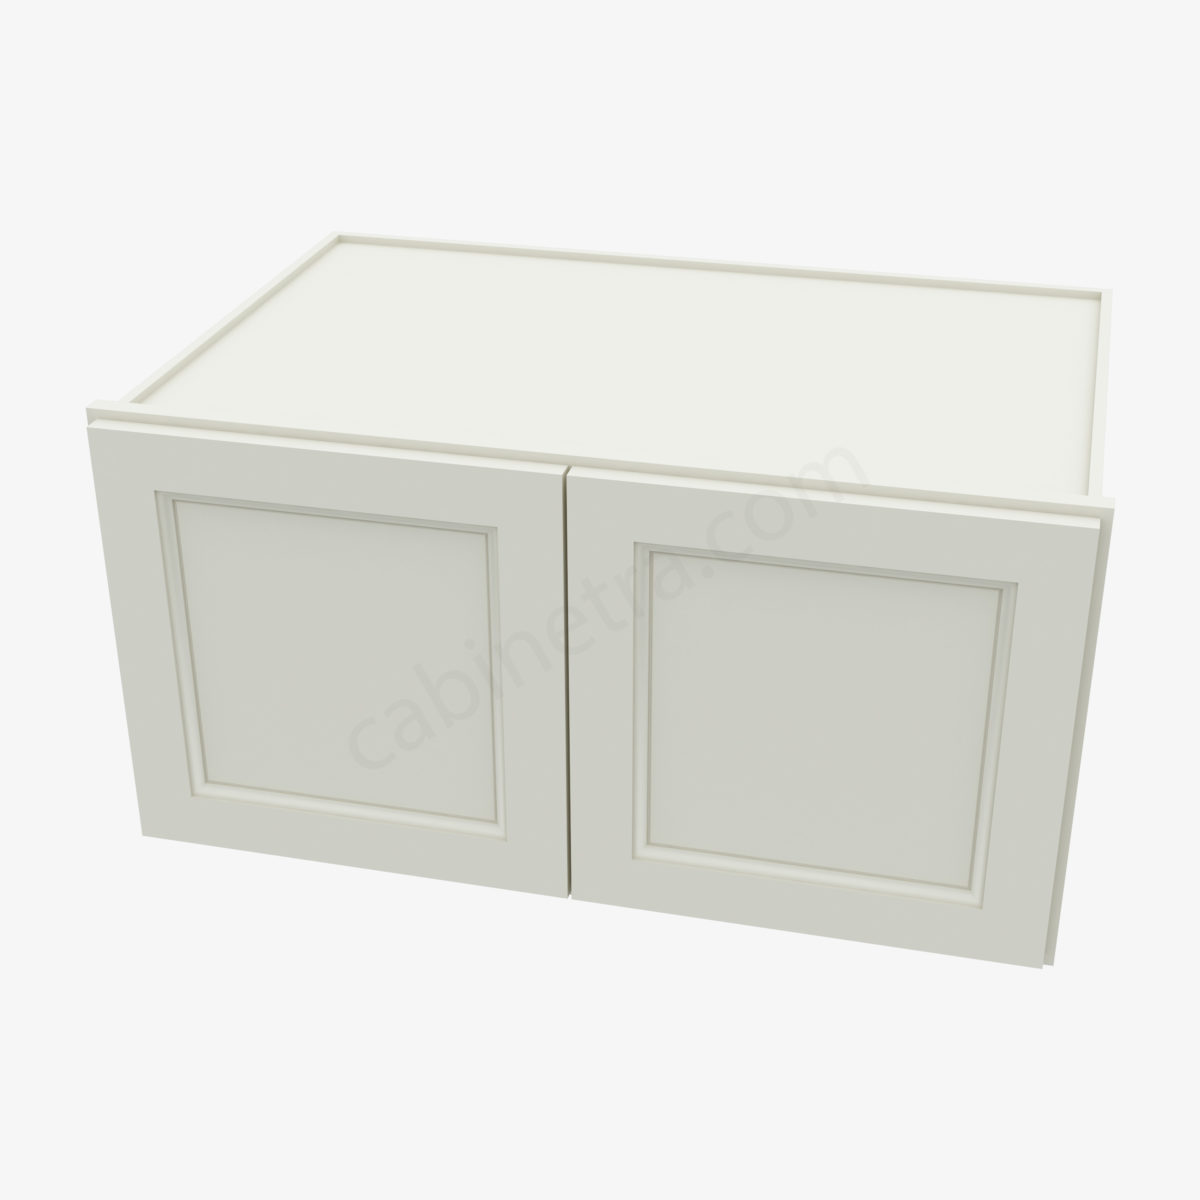 TQ W361824B 3 Forevermark Townplace Crema Cabinetra scaled